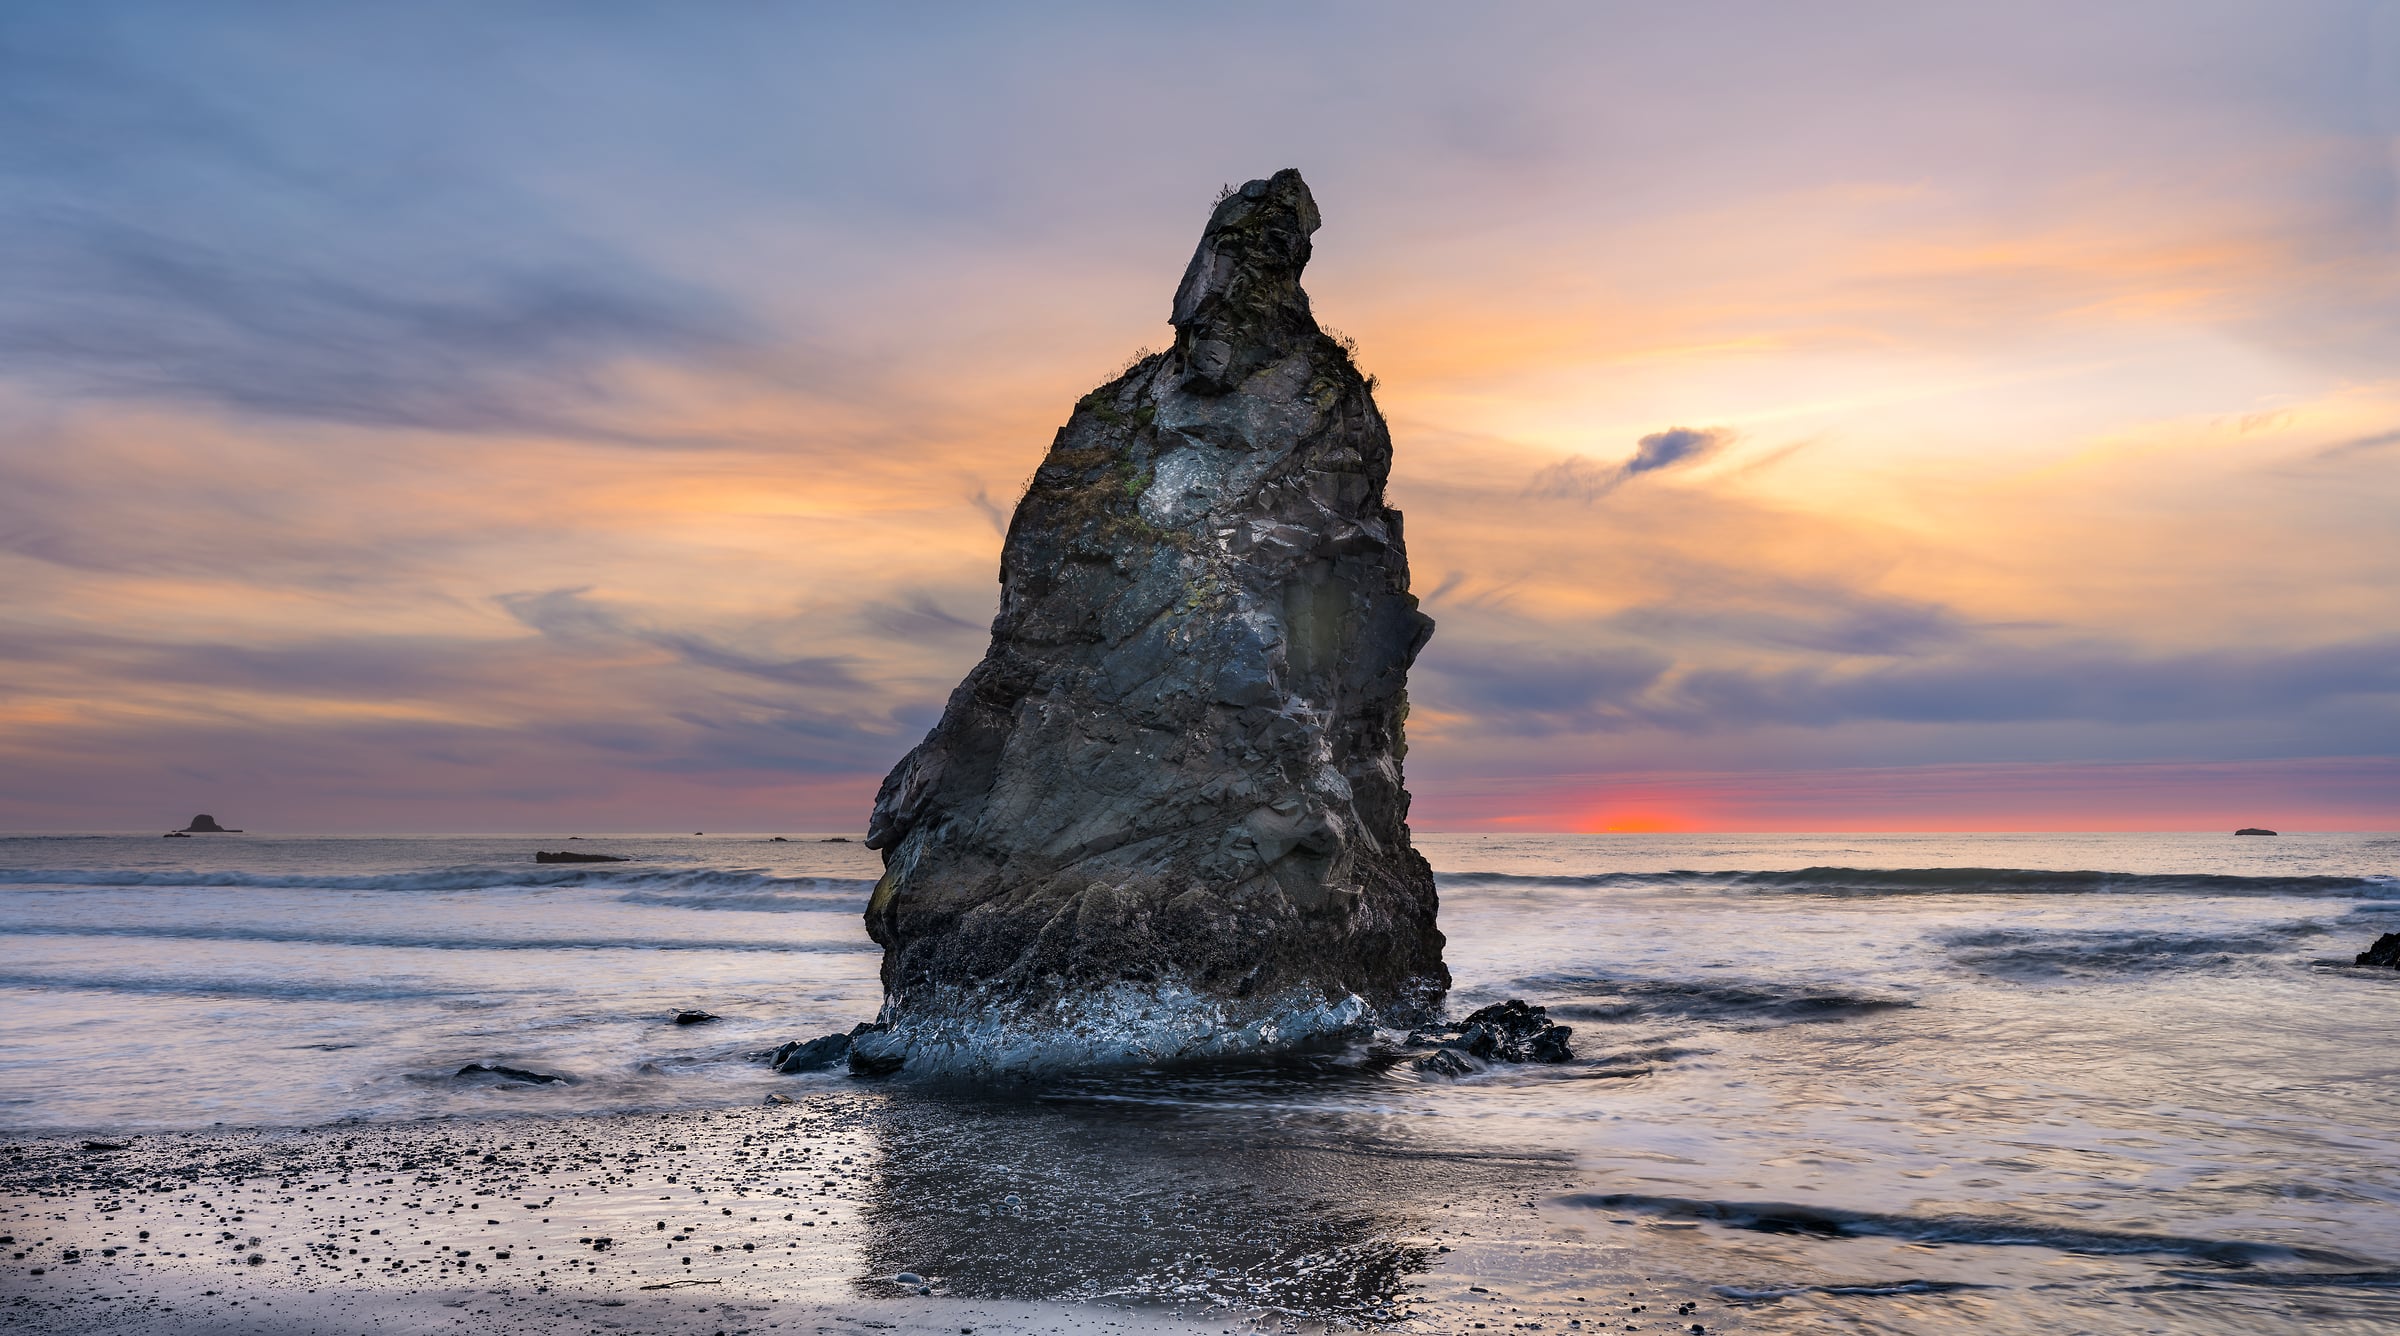 440 megapixels! A very high resolution, large-format VAST photo print of a large rock formation on the beach in the surf of the Pacific Ocean at sunset; photograph created by Chris Blake in Olympic National Park, Washington.